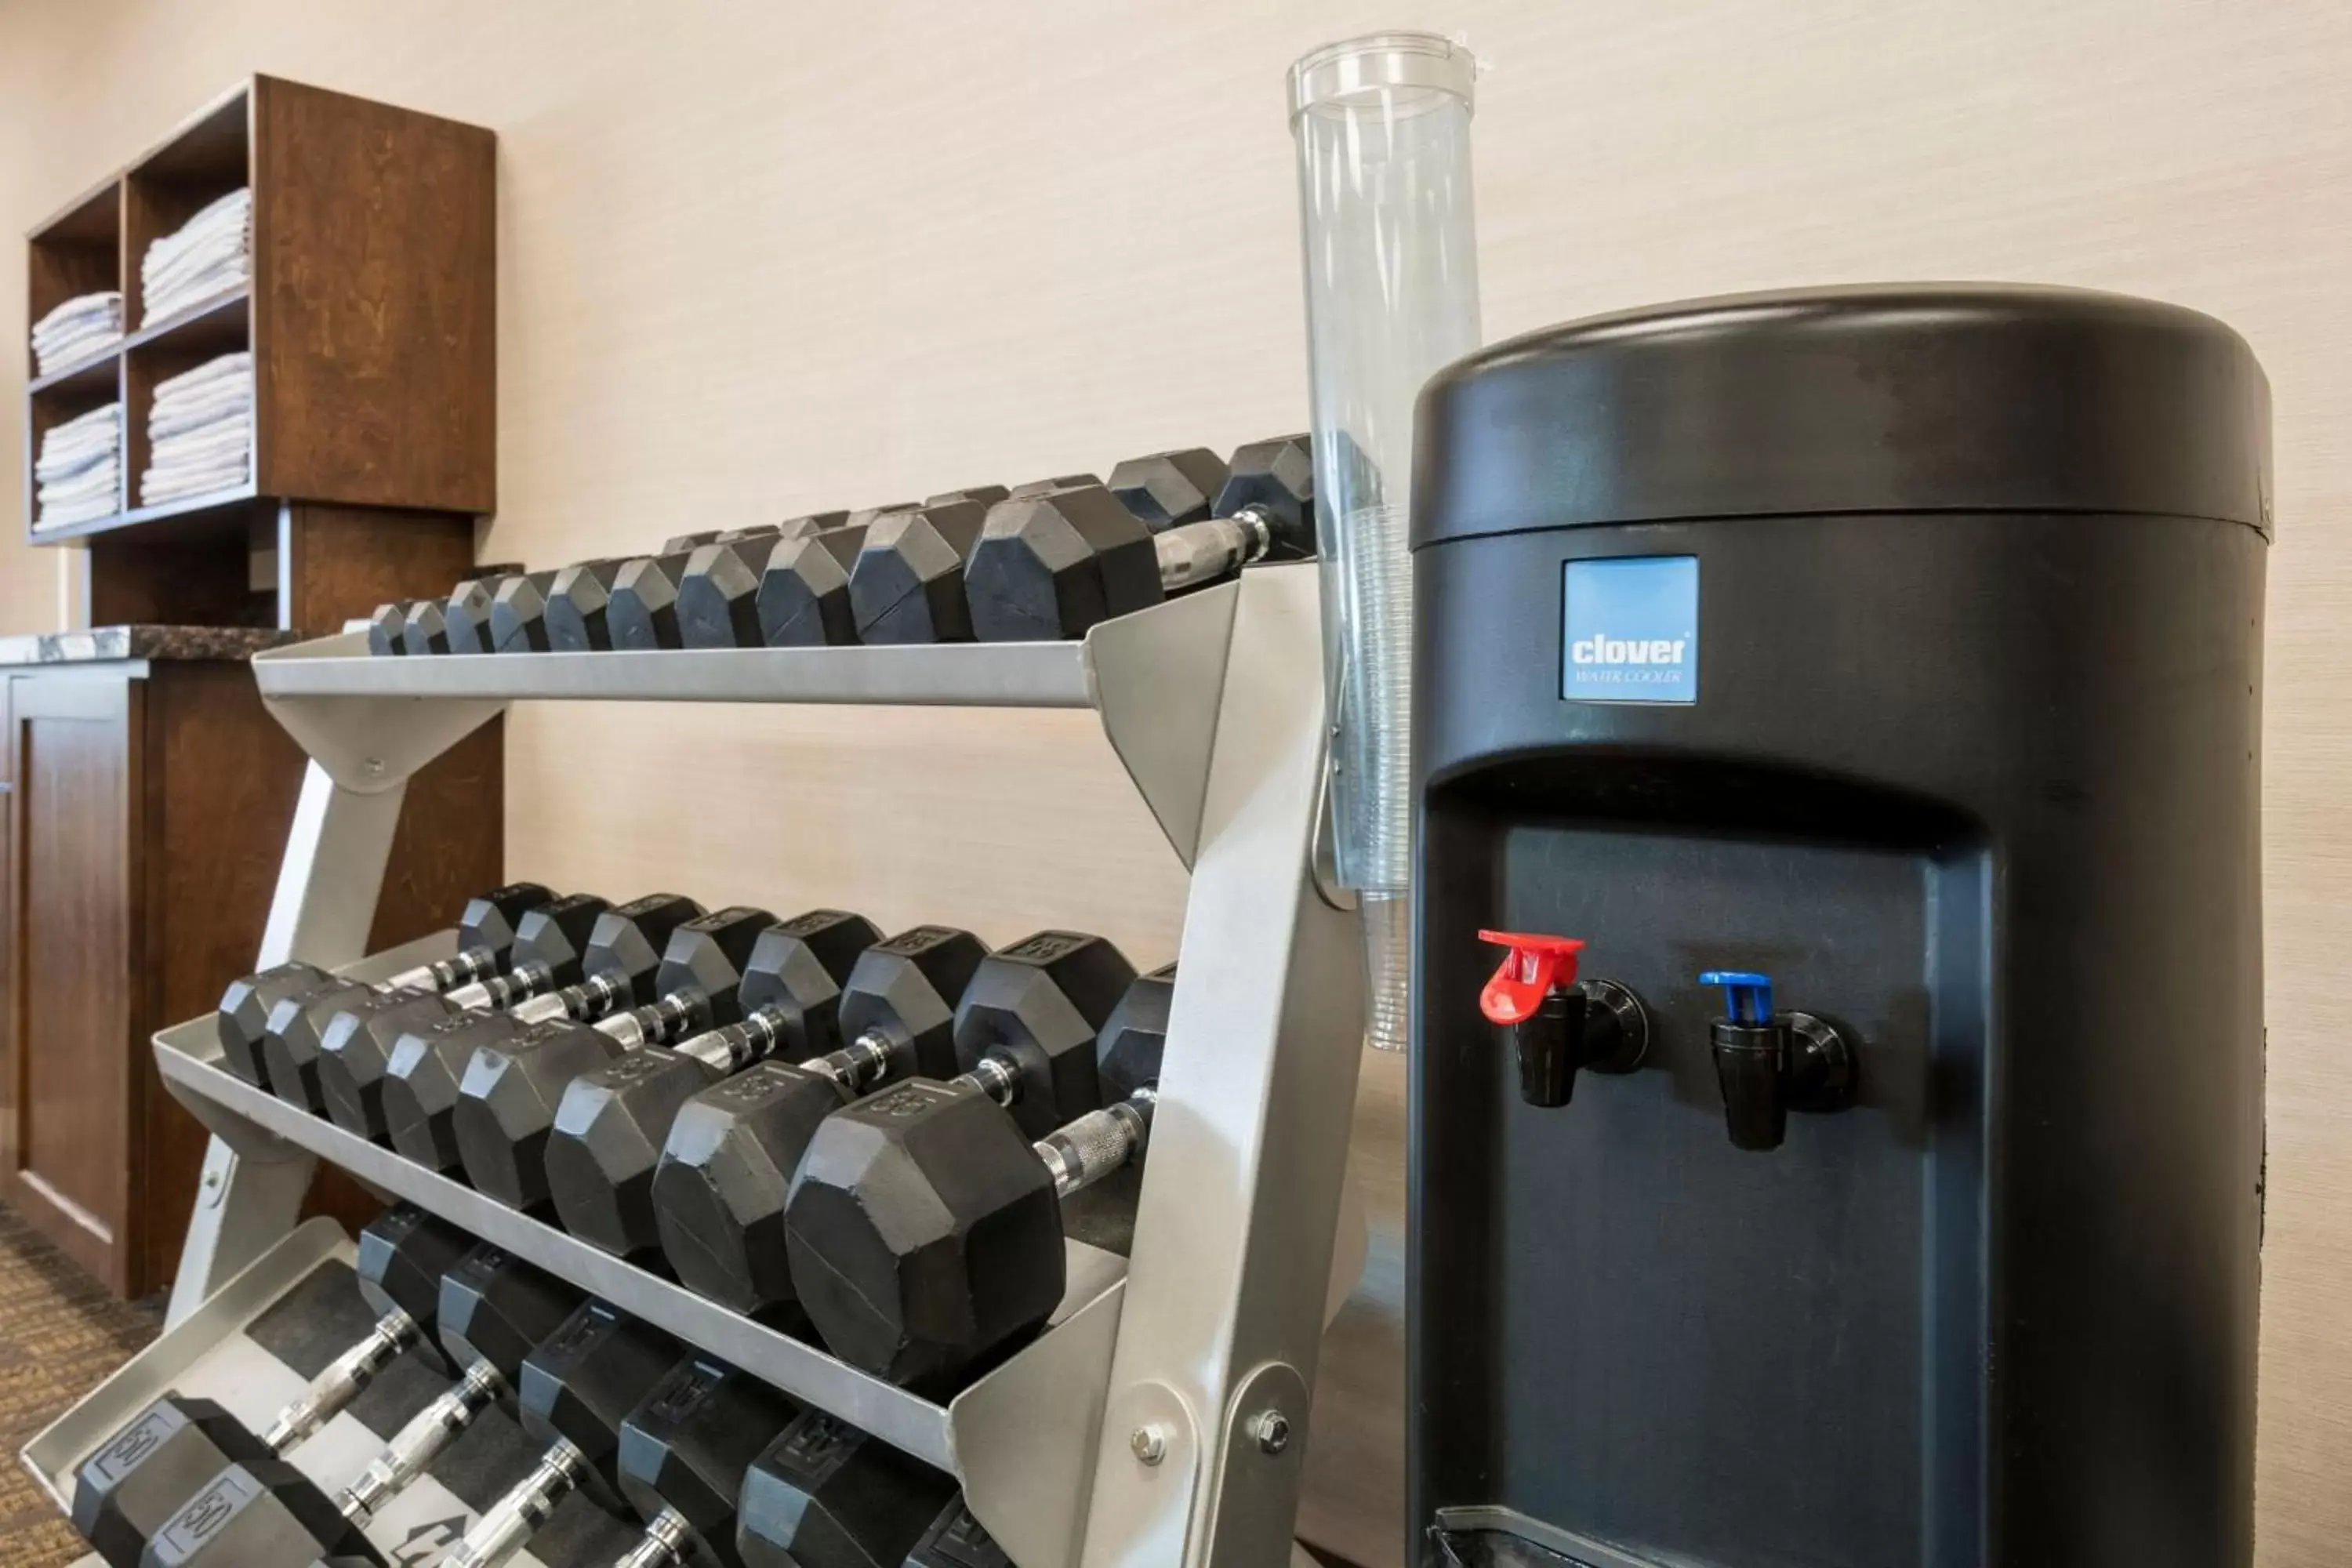 Fitness centre/facilities, Fitness Center/Facilities in Courtyard by Marriott Abilene Northeast